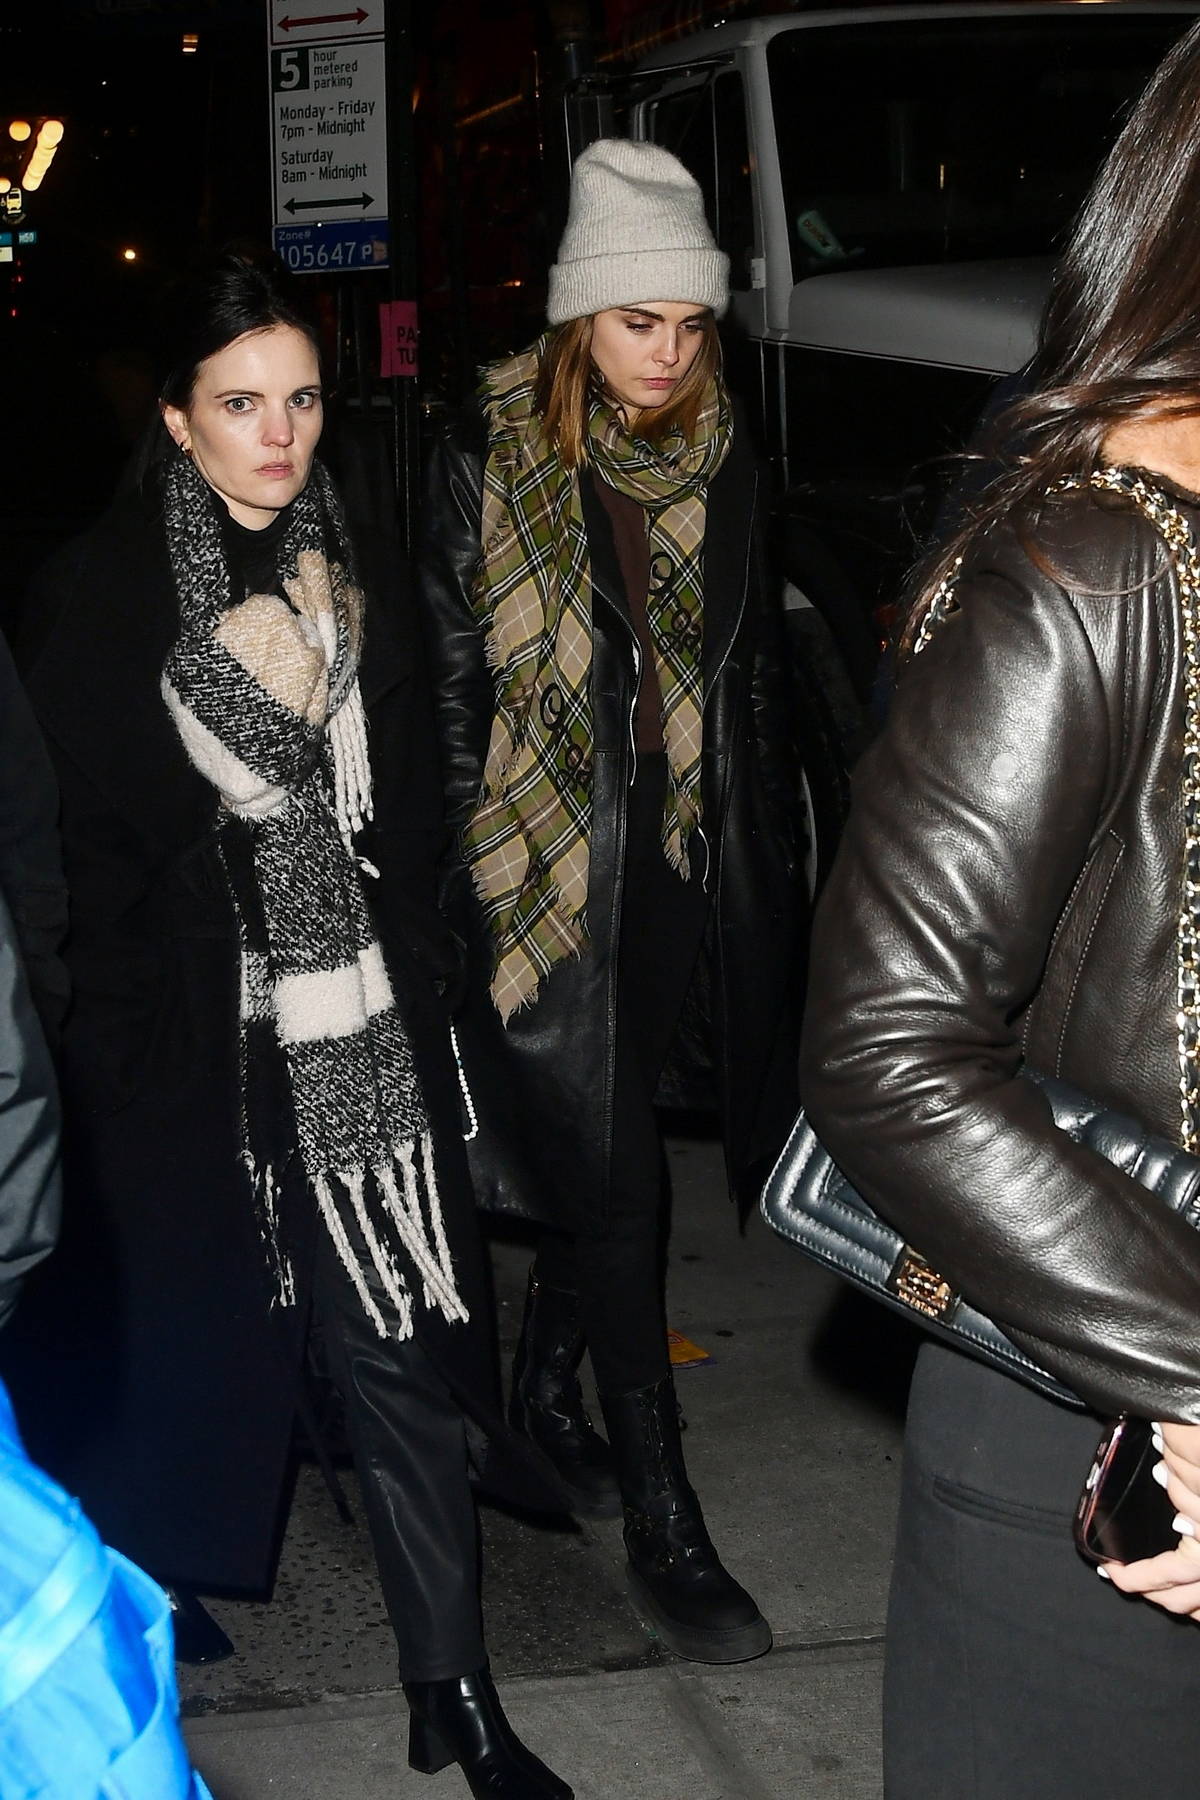 Cara Delevingne bundles up in winter clothes as she arrives at the